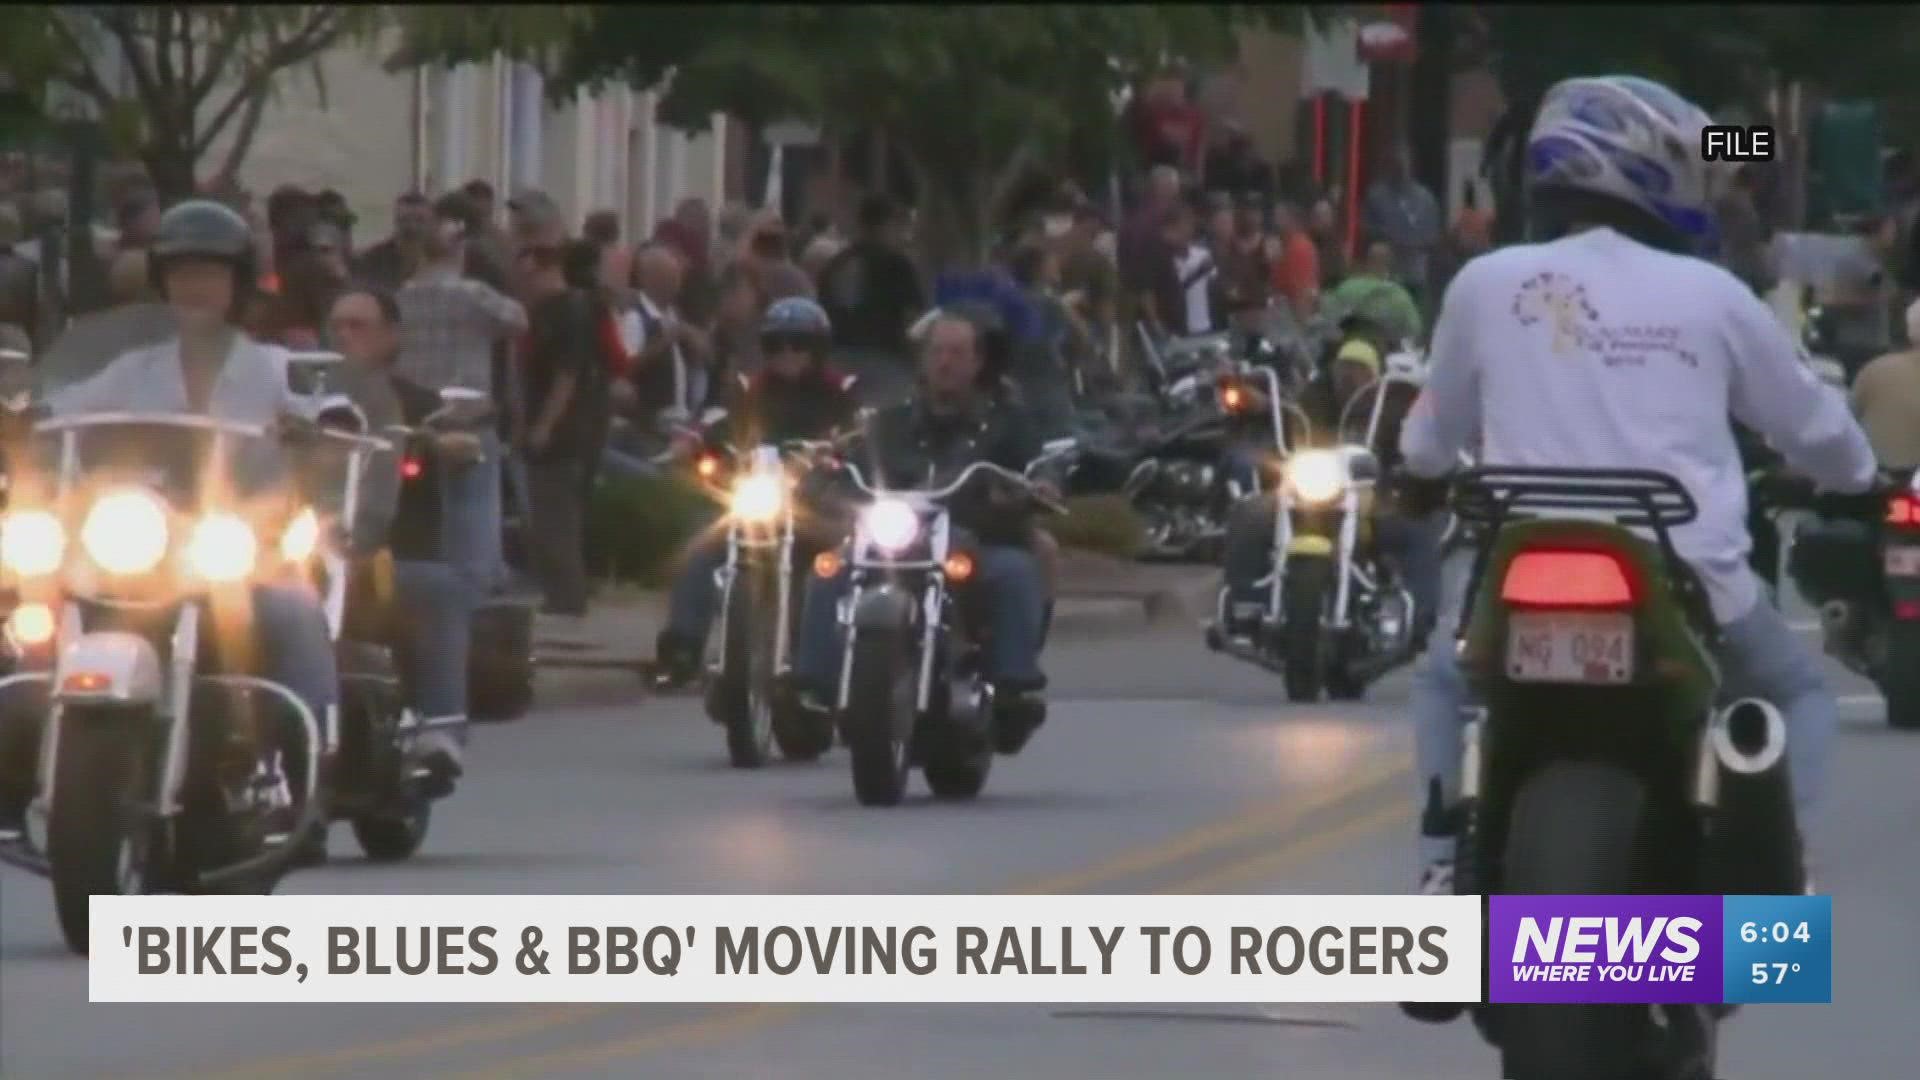 The rally will be held in October in Rogers instead of Fayetteville where it's been for more than 20 years.